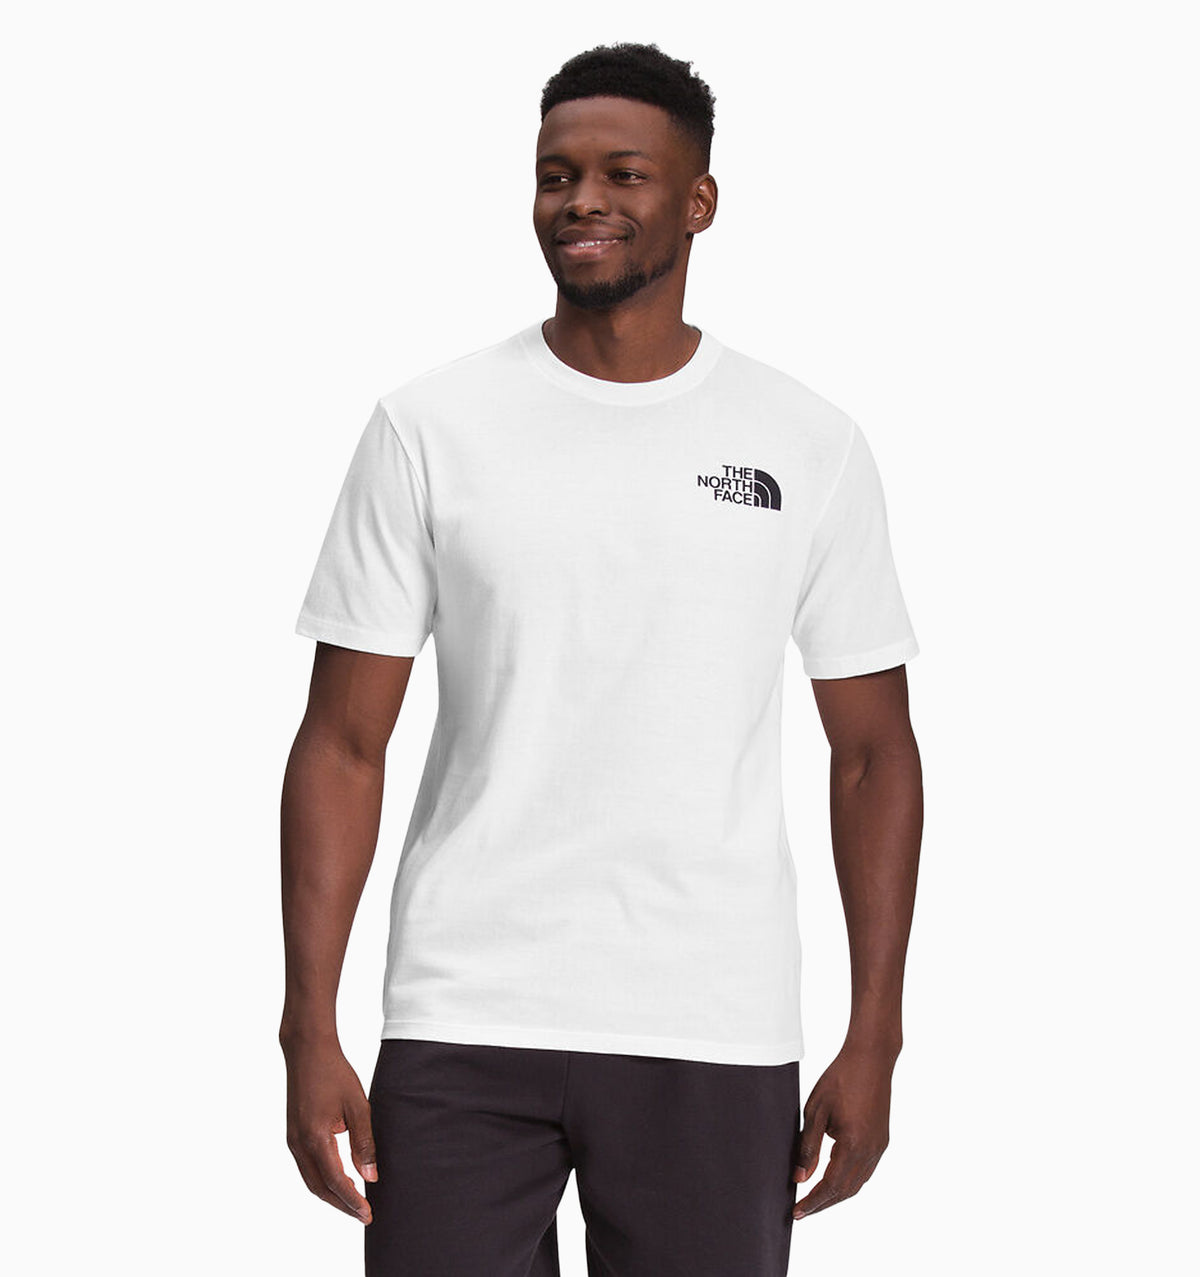 The North Face Men's S/S Box NSE Tee - White